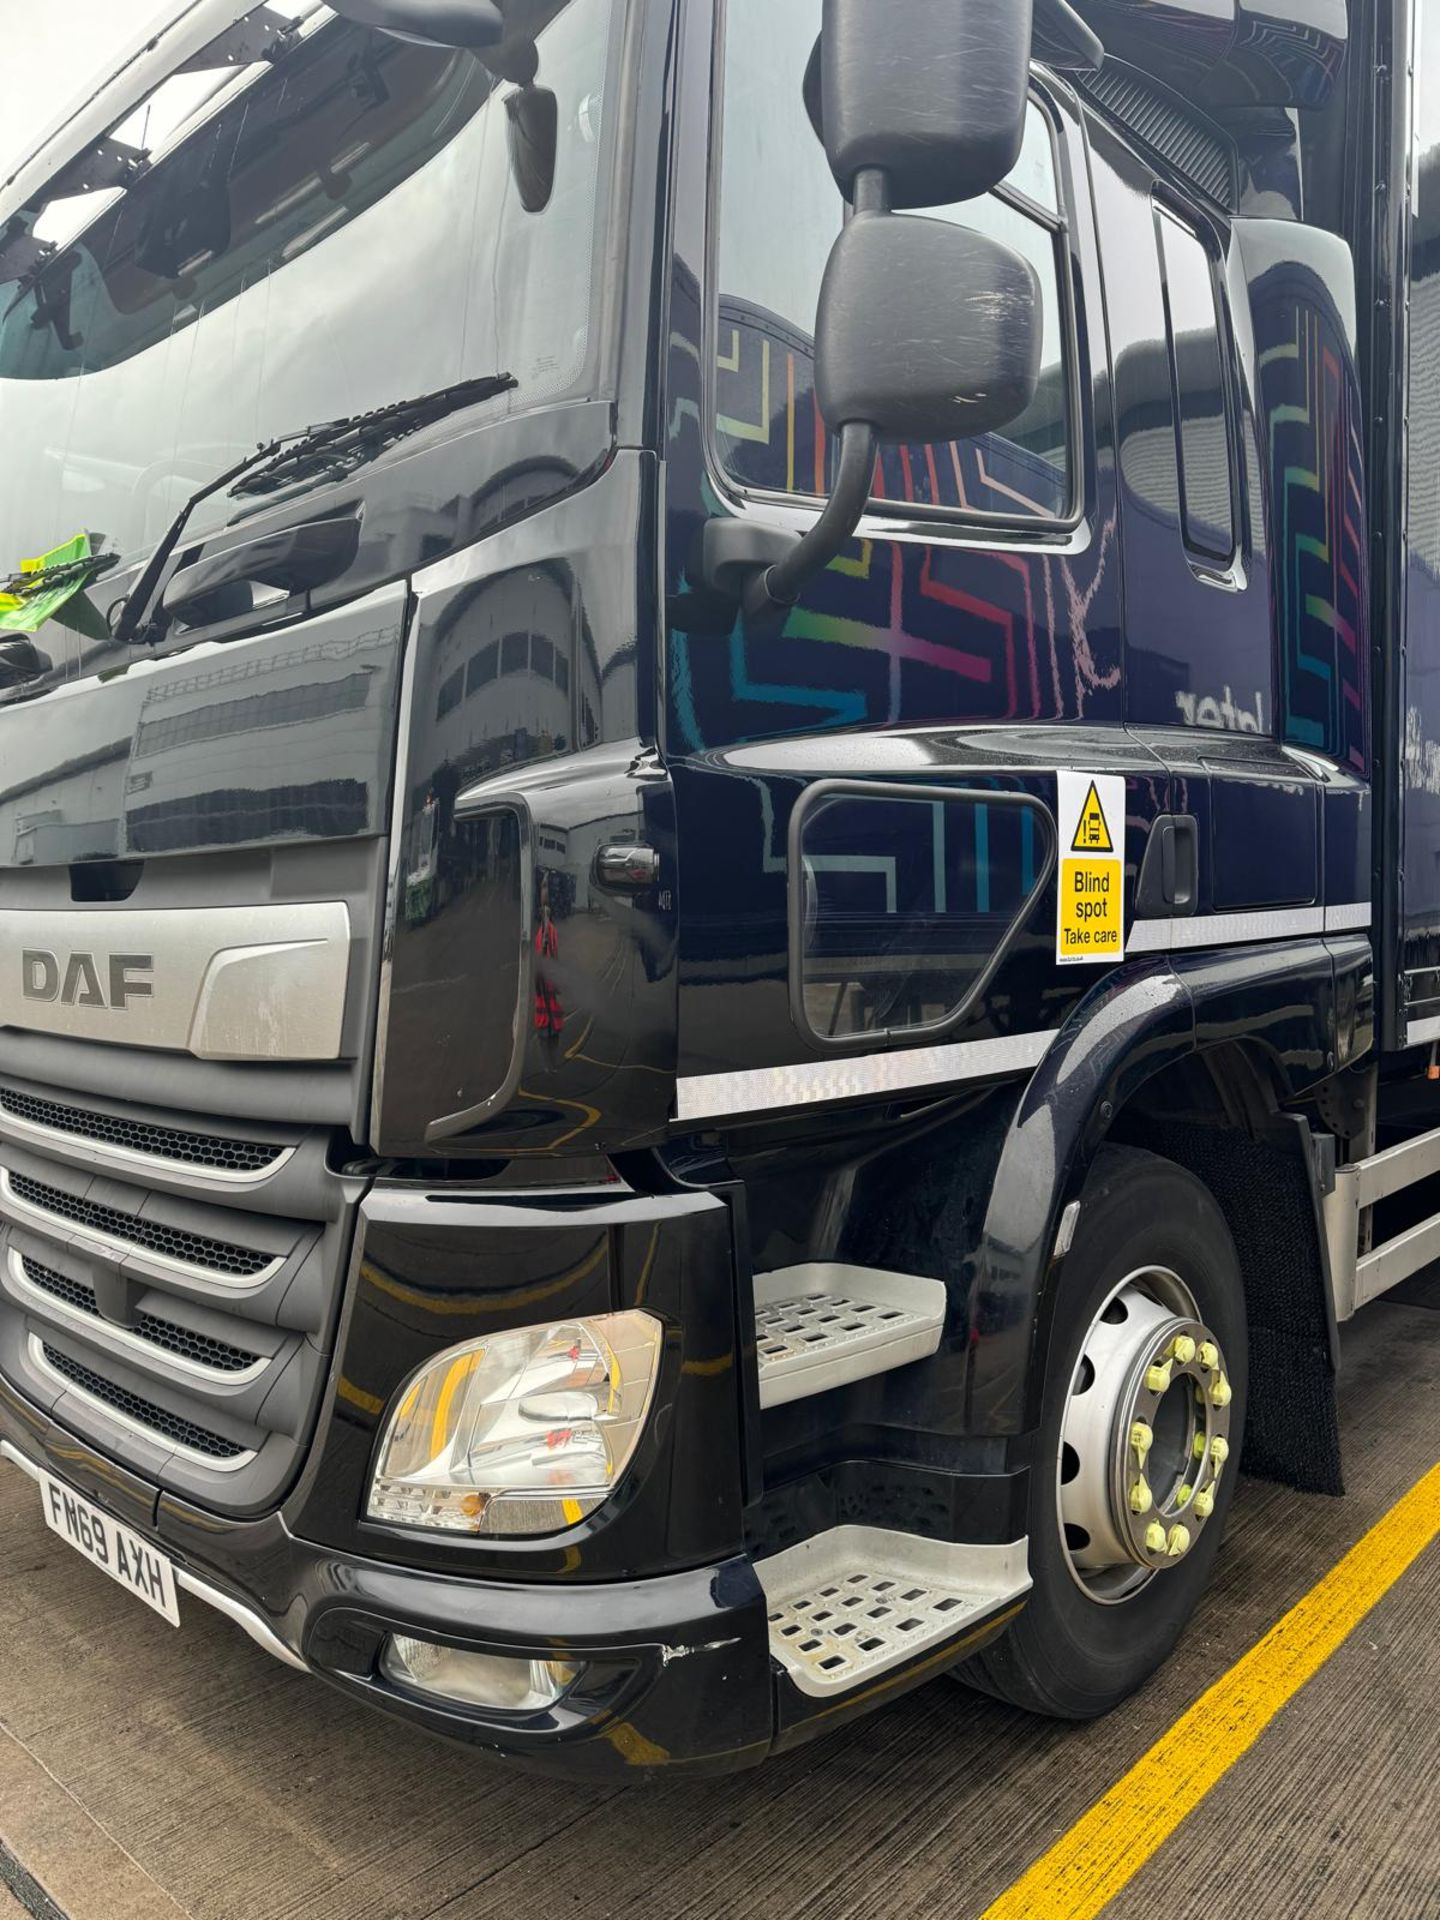 2019, DAF CF 260 FA (Ex-Fleet Owned & Maintained) - FN69 AXH (18 Ton Rigid Truck with Tail Lift) - Image 7 of 22